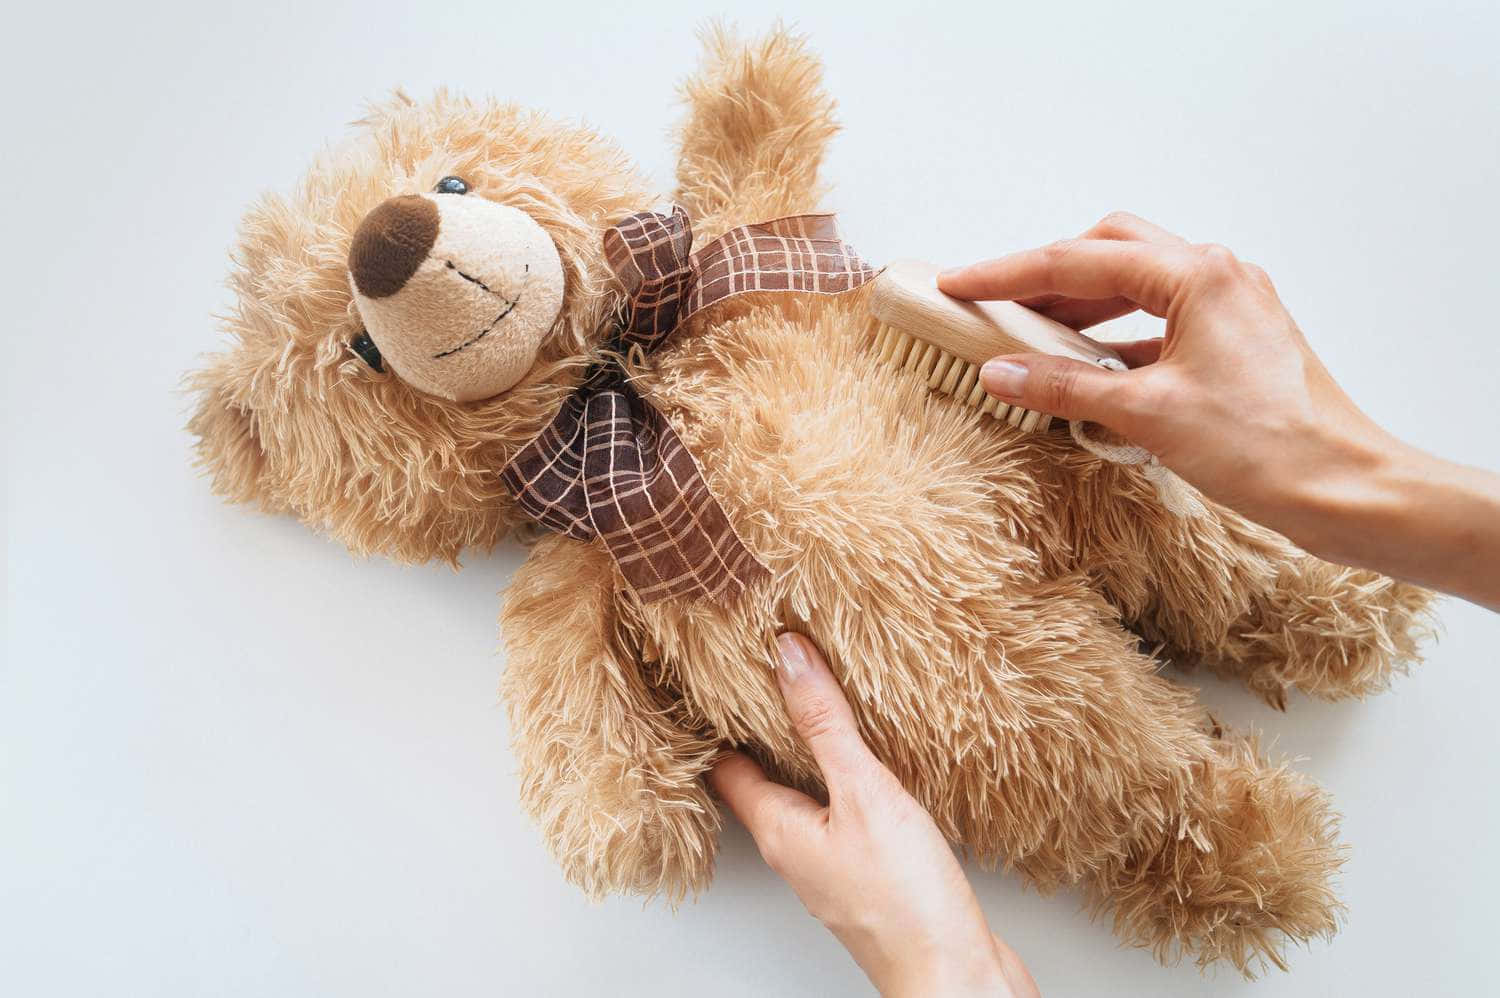 The Perfect Gift - A Soft and Cuddly Teddy Bear